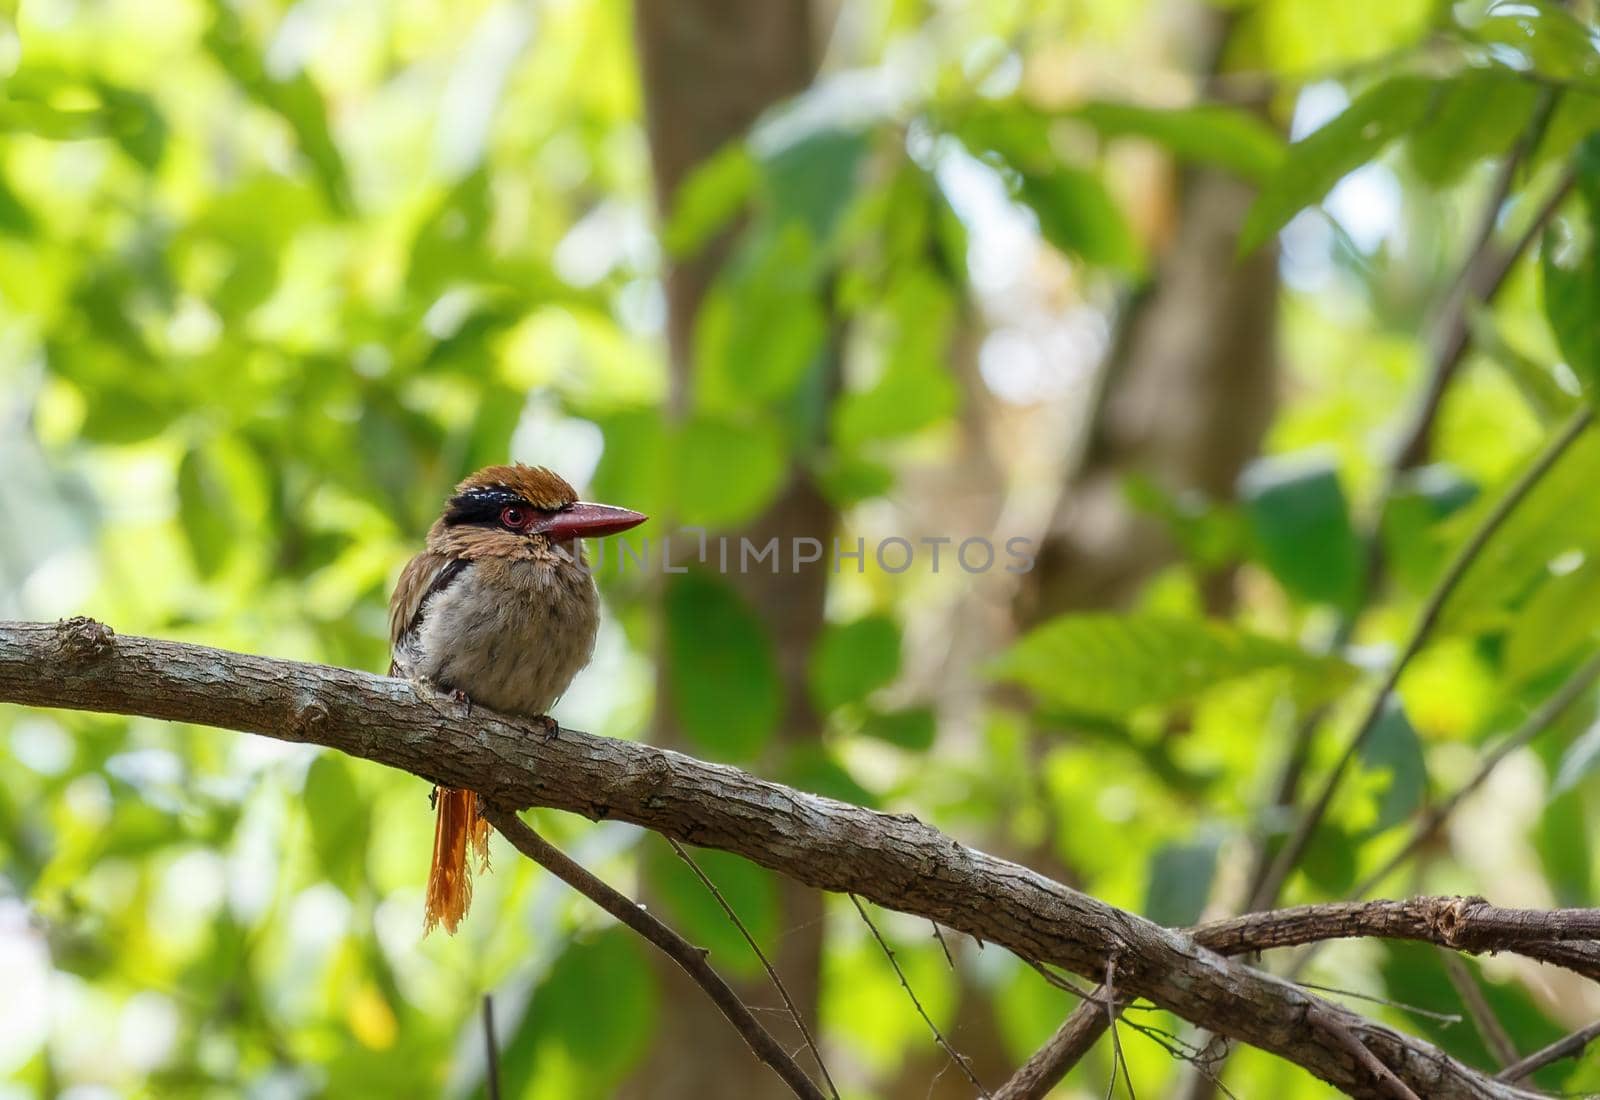 beautiful bird Lilac-cheeked Kingfisher or Celebes flat-billed kingfisher, Cittura cyanotis, sitting on the branch in the green tropical Tangkoko forest. Indonesia wildlife by artush